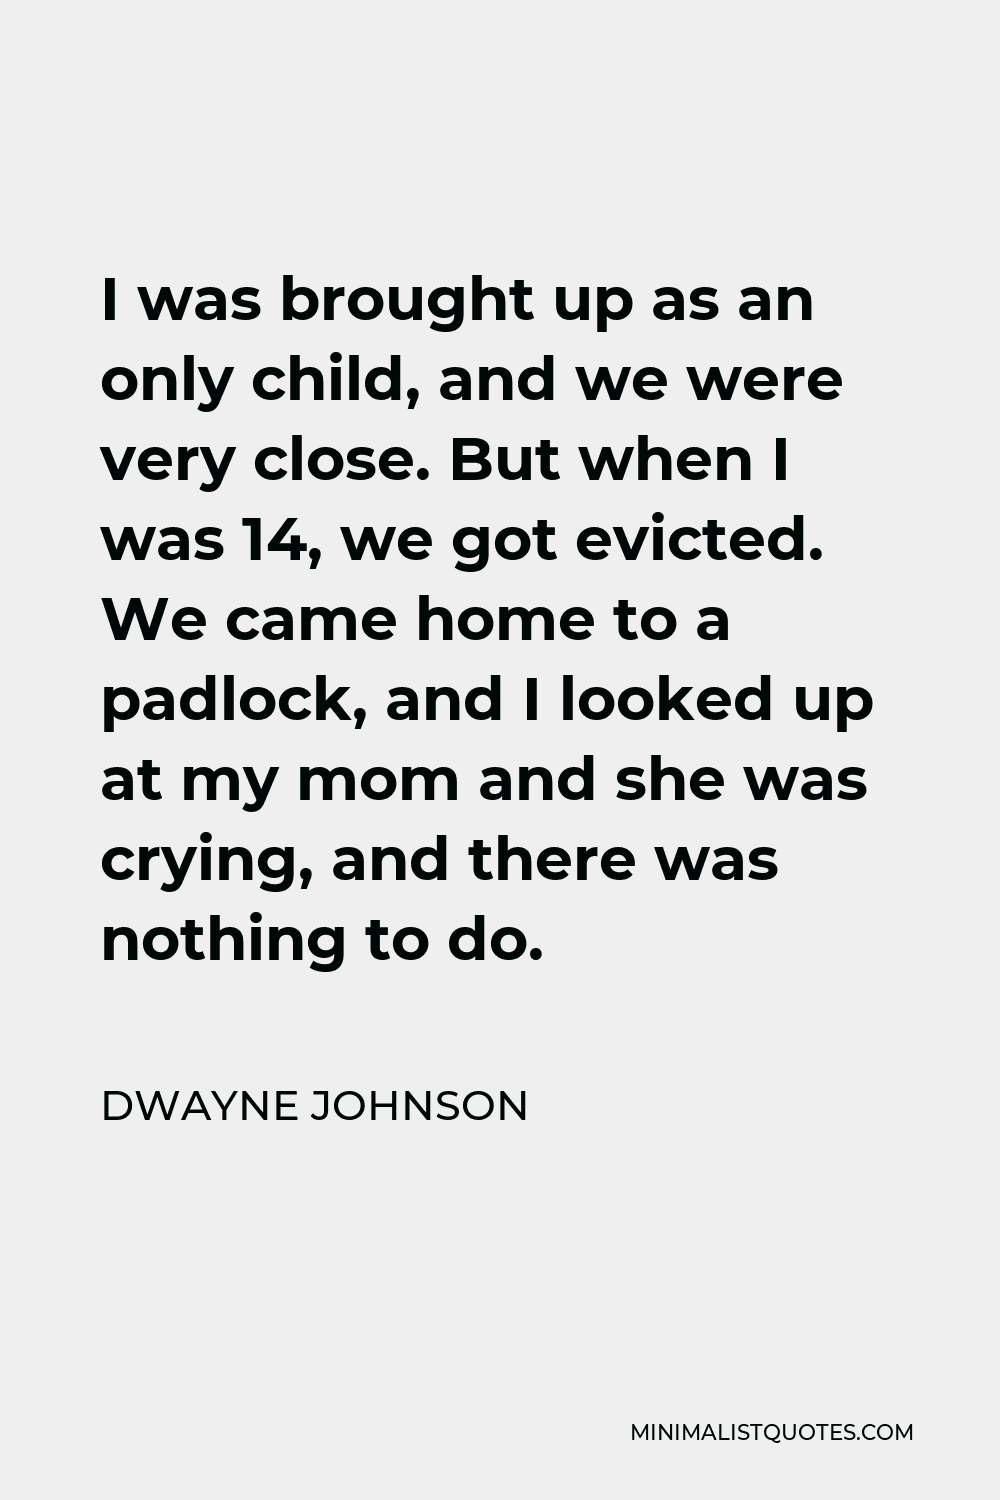 Dwayne Johnson Quote - I was brought up as an only child, and we were very close. But when I was 14, we got evicted. We came home to a padlock, and I looked up at my mom and she was crying, and there was nothing to do.